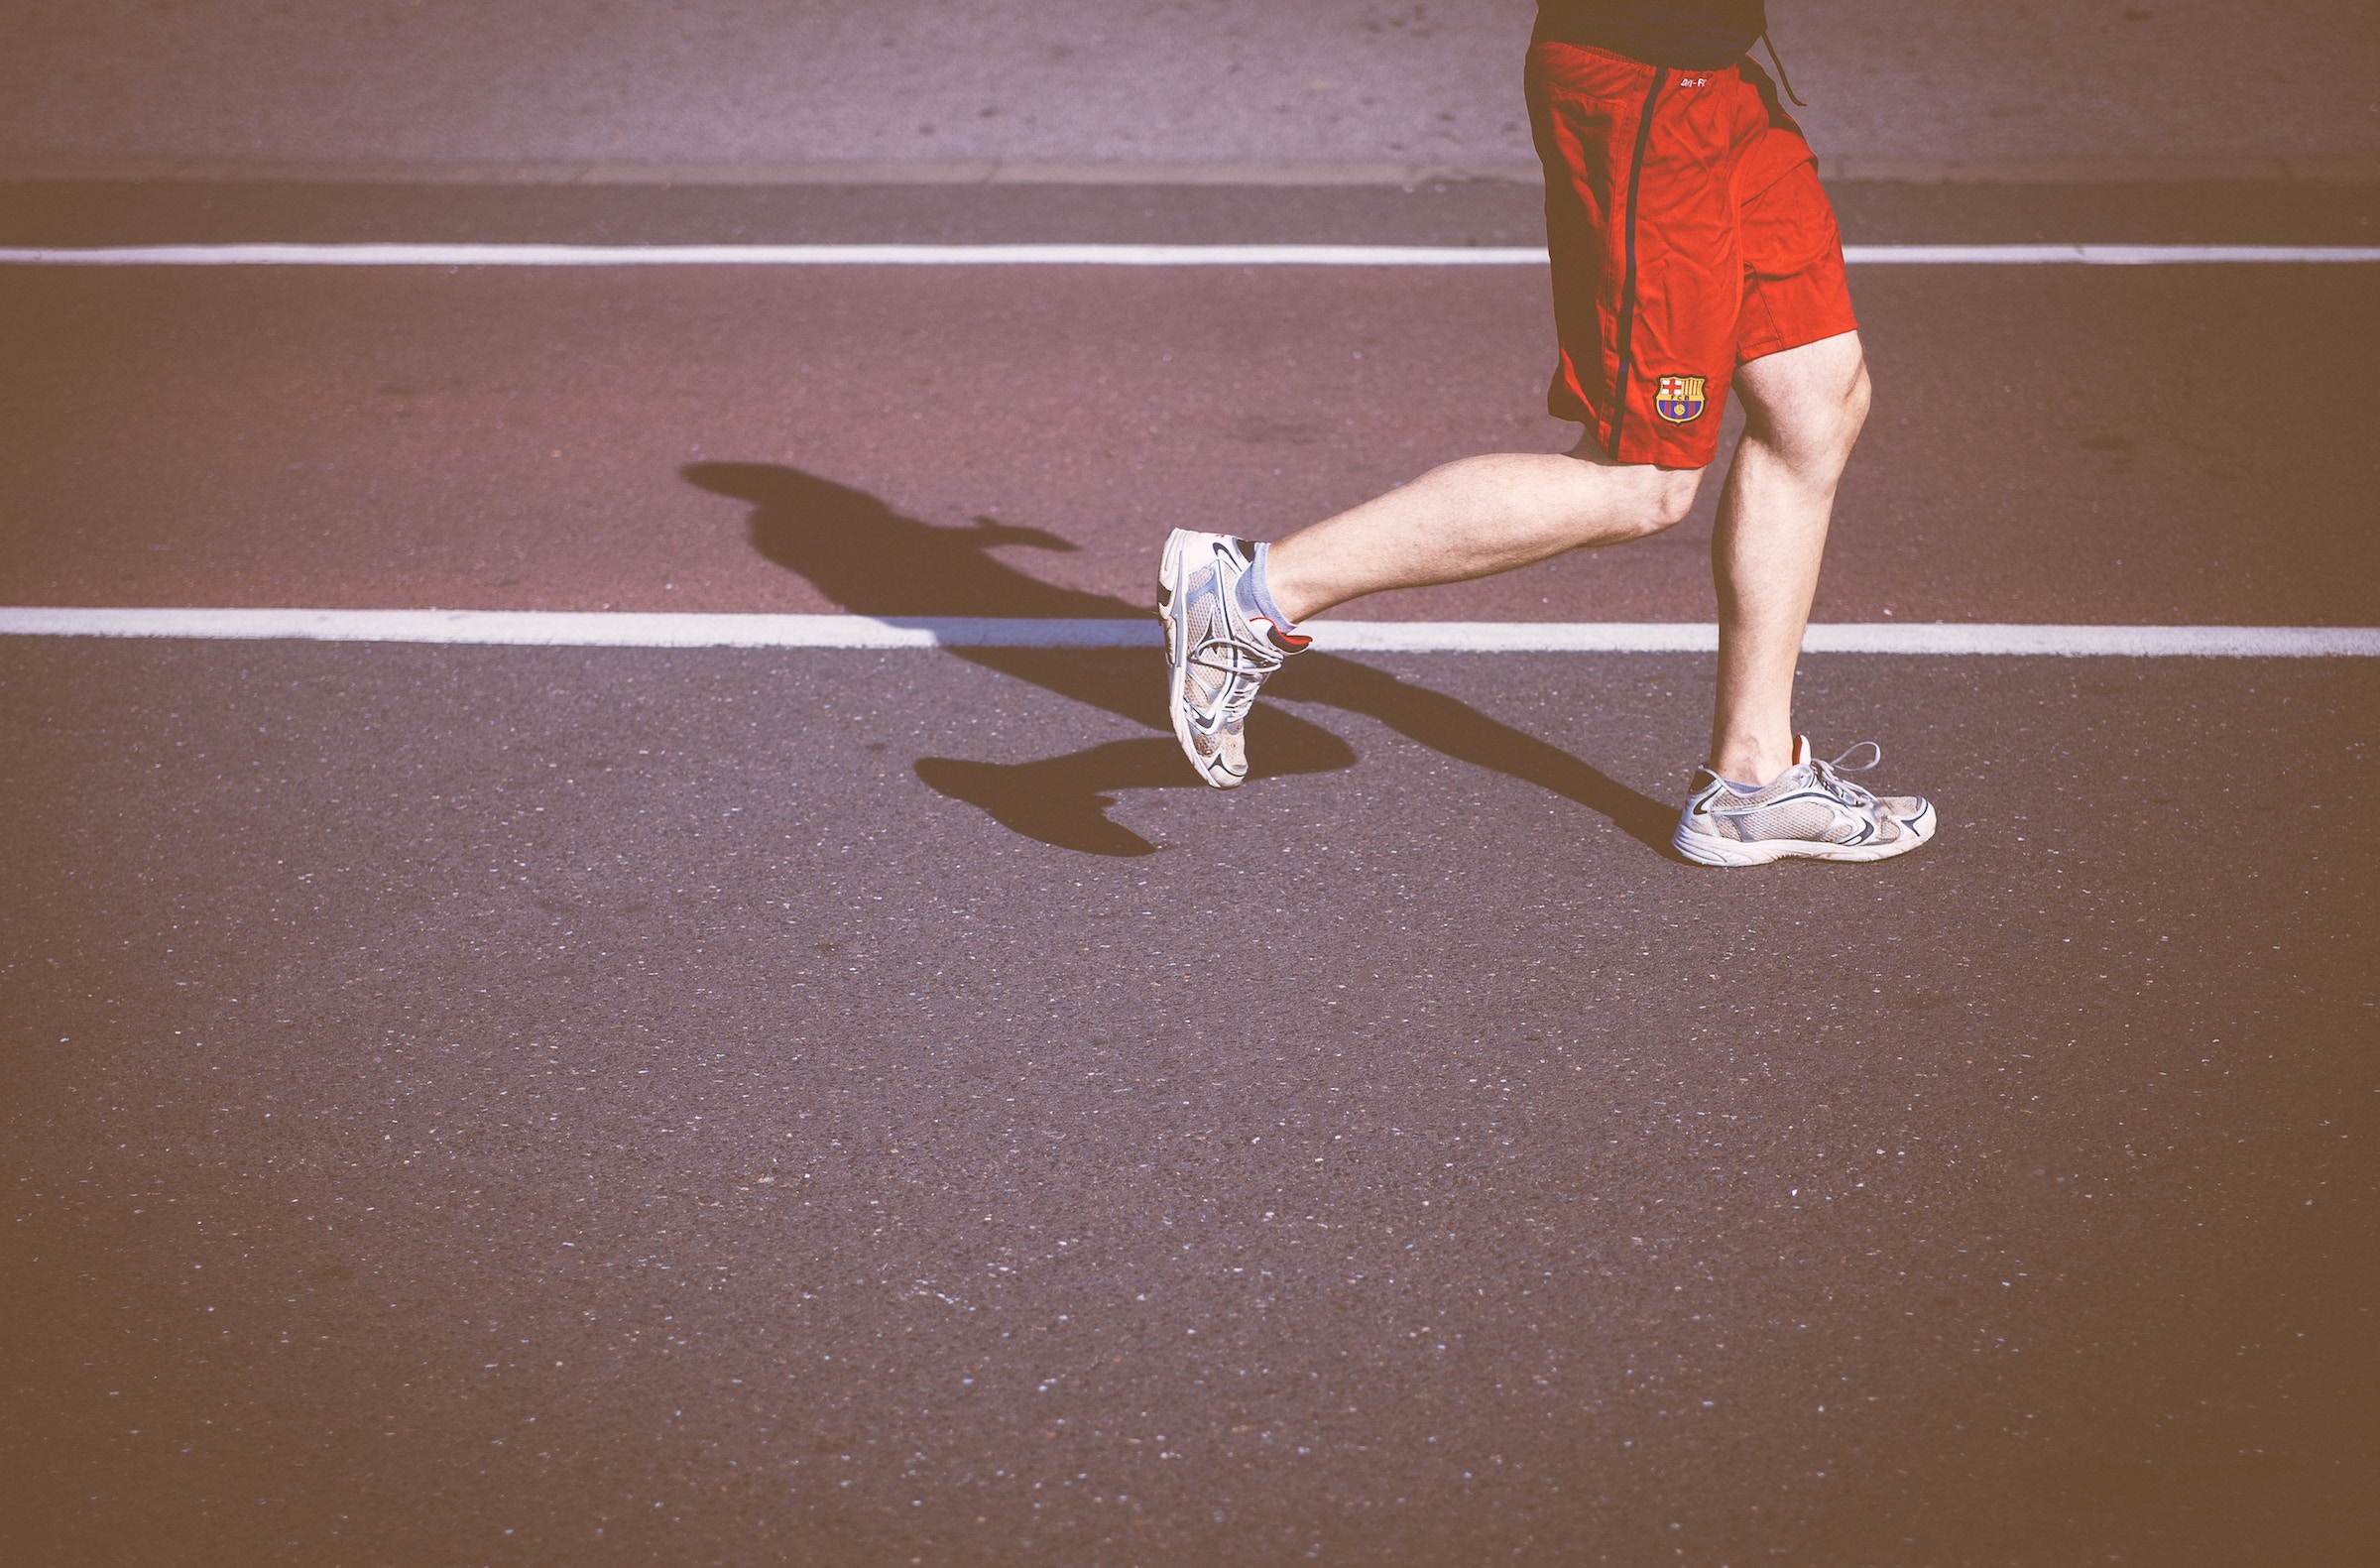 Man in red shorts running on a track